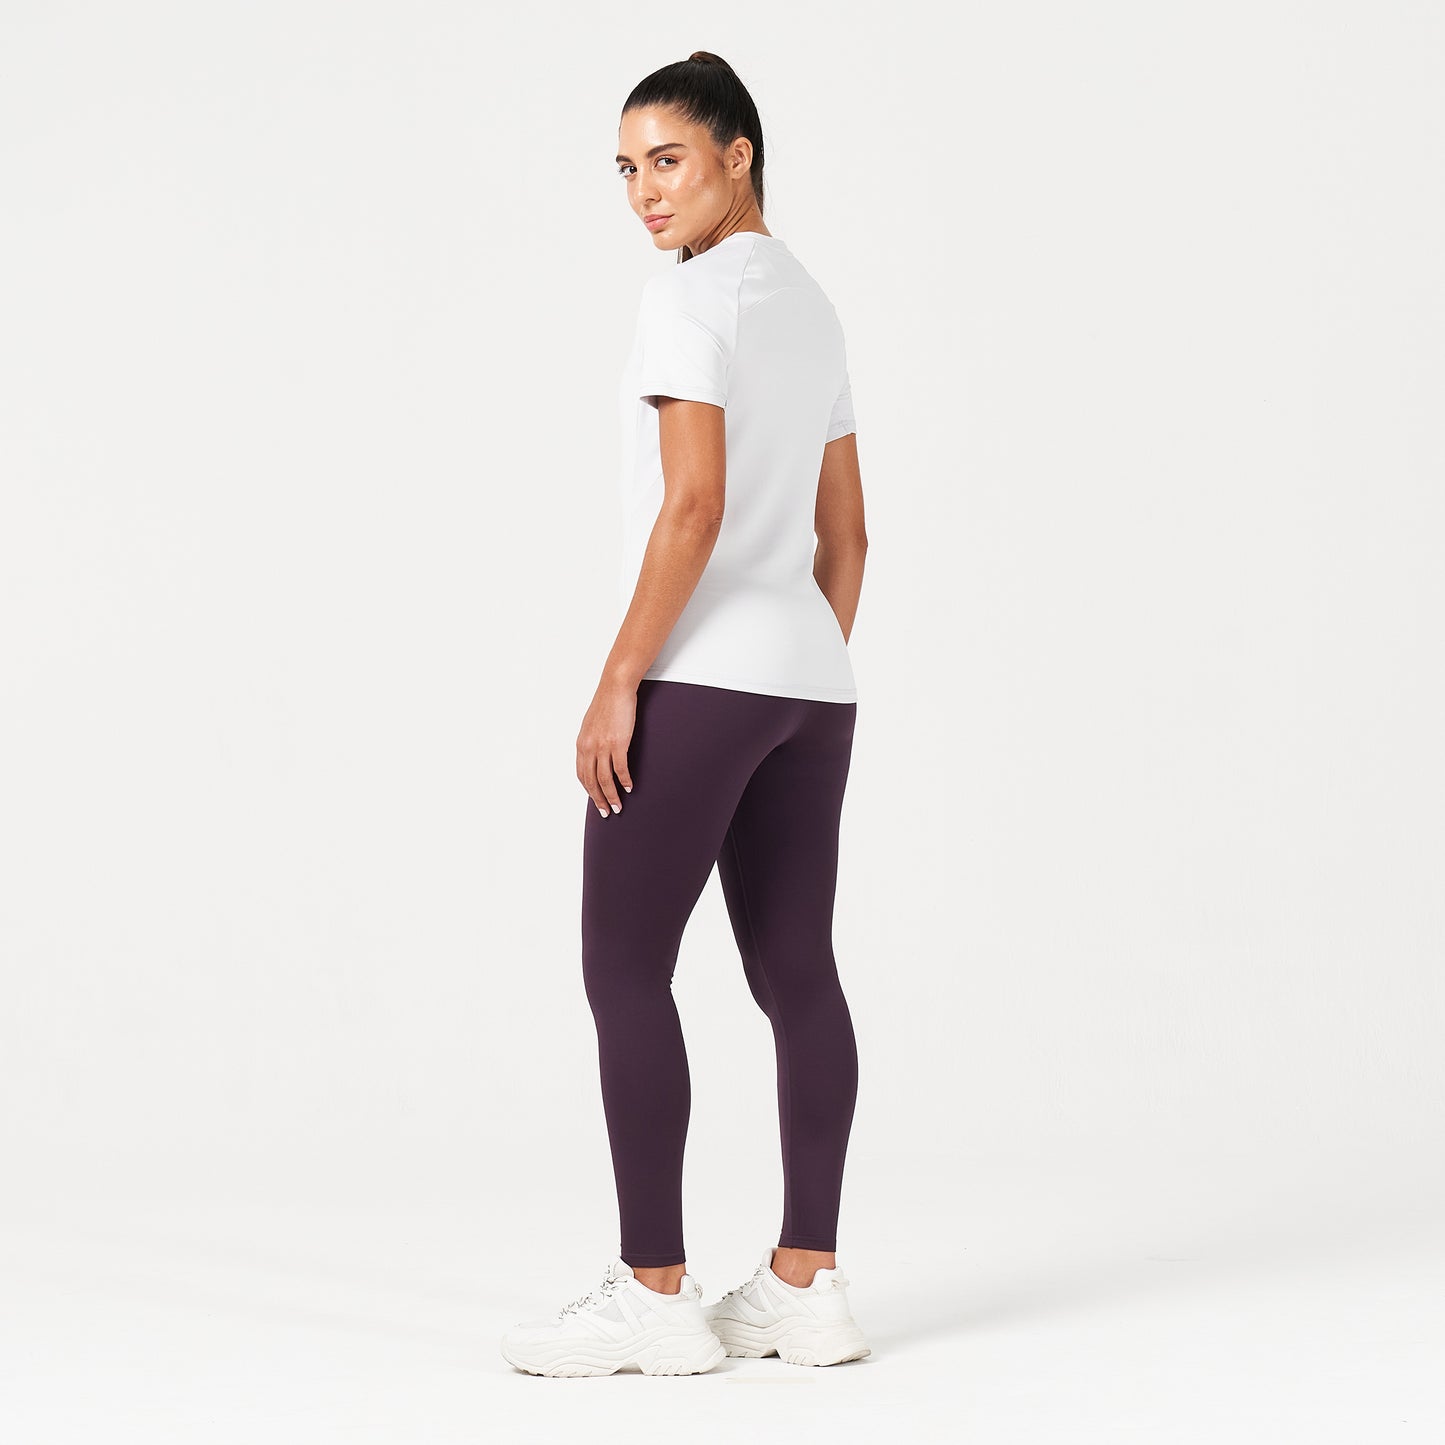 squatwolf-workout-clothes-lab360-tdry-contour-tee-lilac-hint-gym-t-shirts-for-women